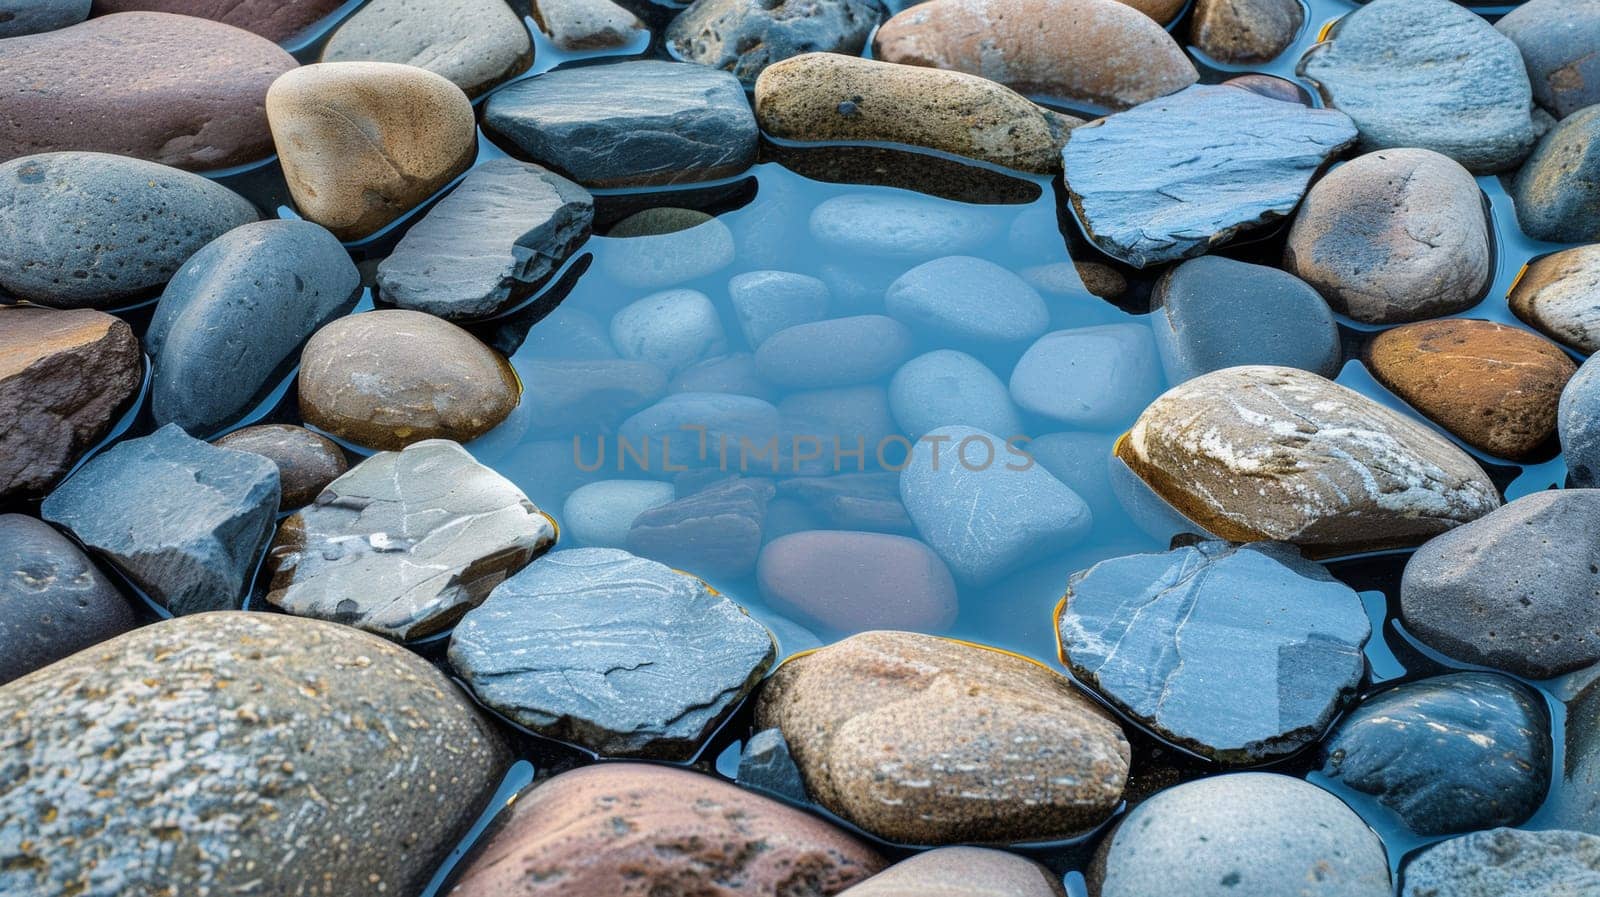 A small blue pool surrounded by rocks and pebbles